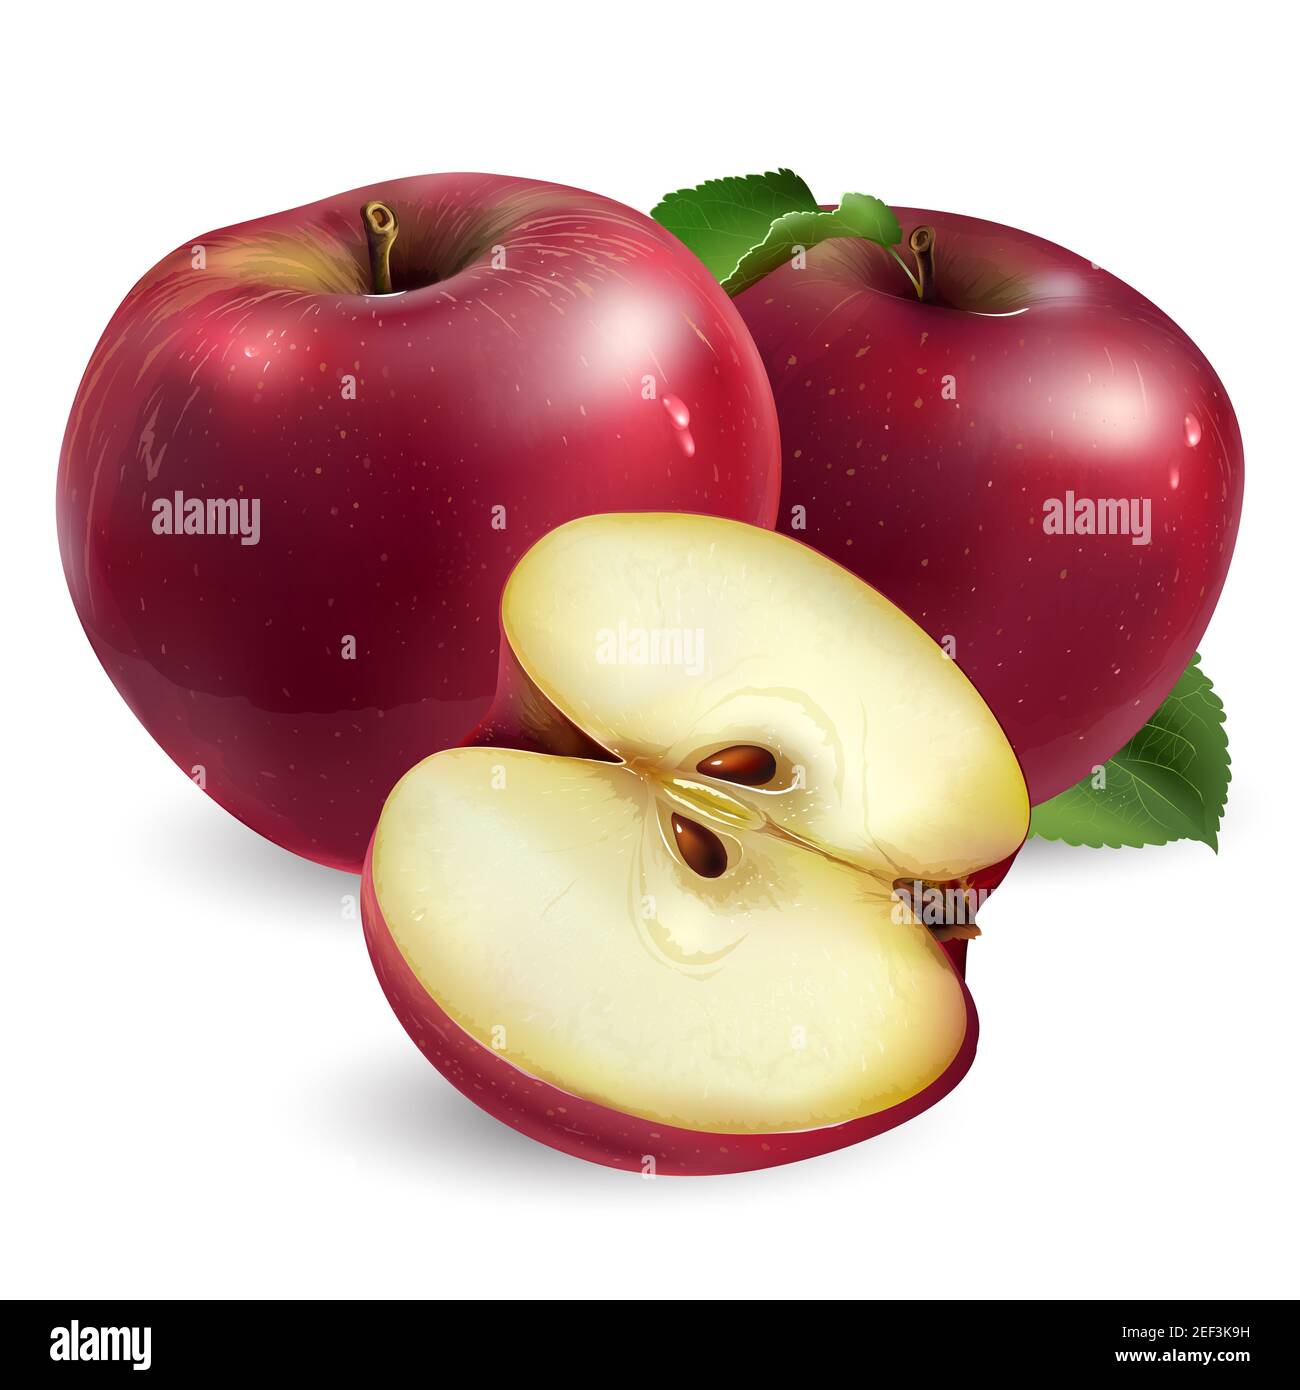 Two red apples and a half on white background. Stock Photo